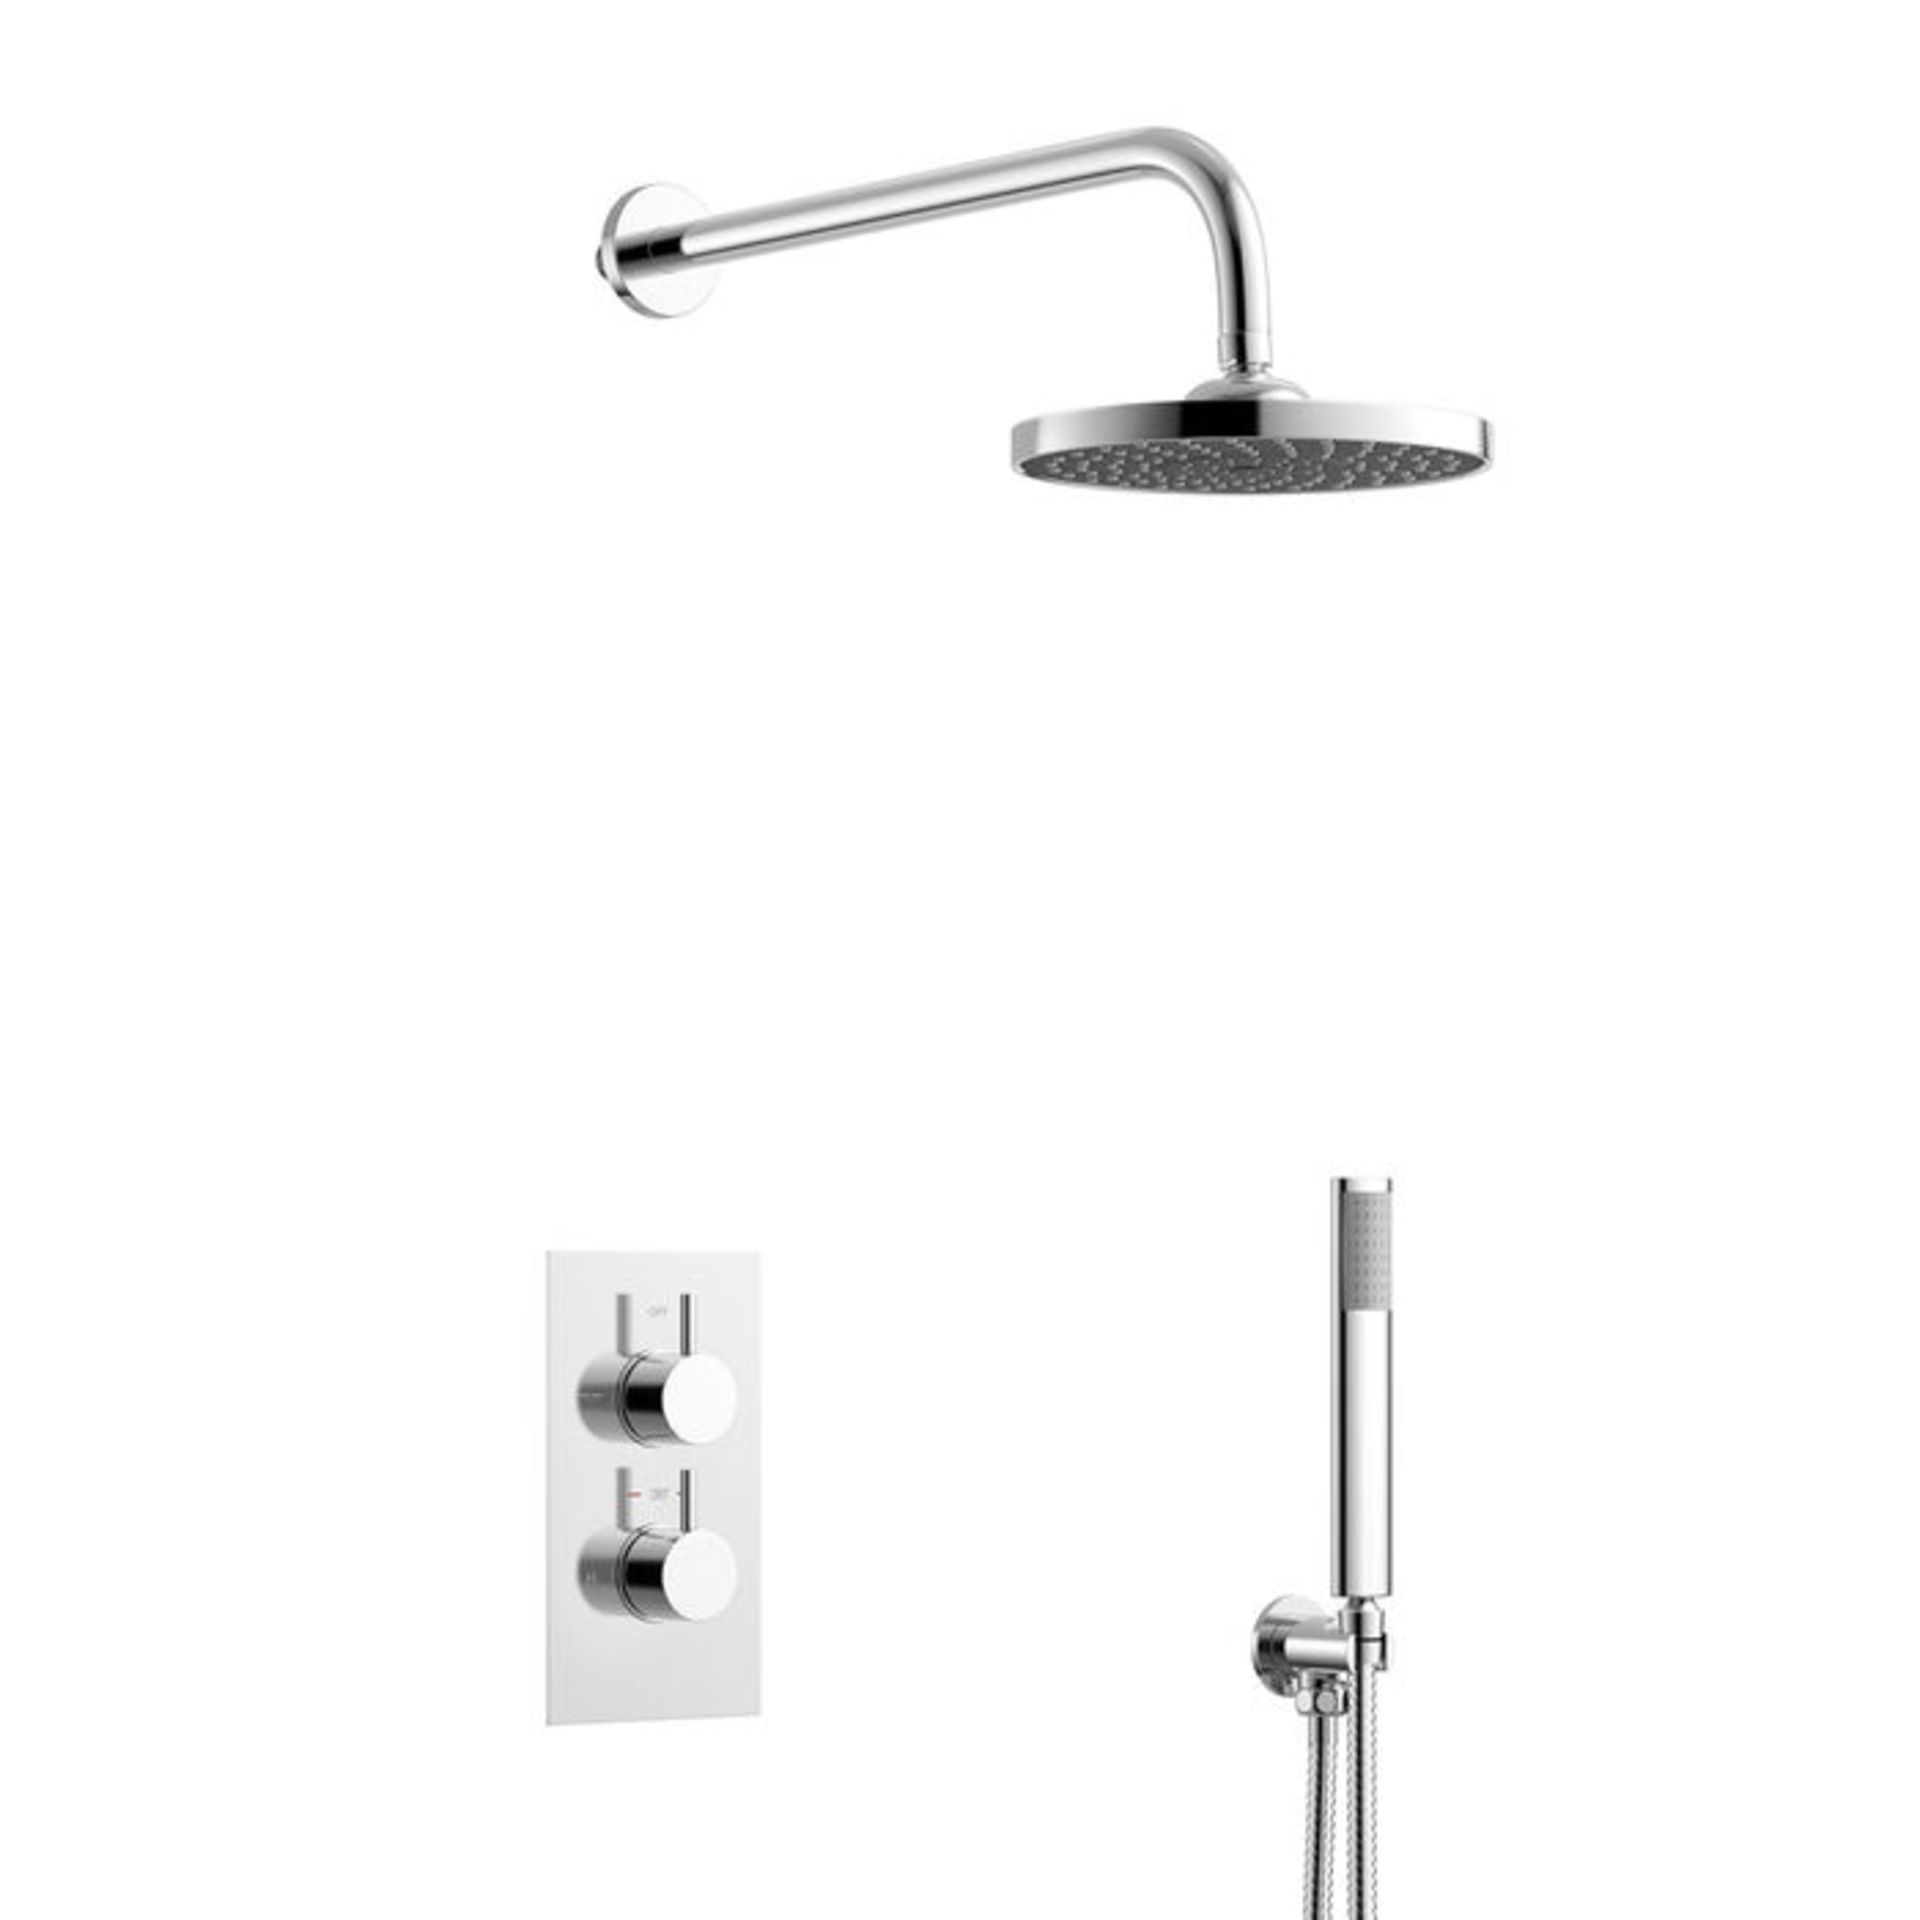 (PM37) Round Concealed Thermostatic Mixer Shower Kit & Medium Head. Family friendly detachabl... - Image 5 of 5